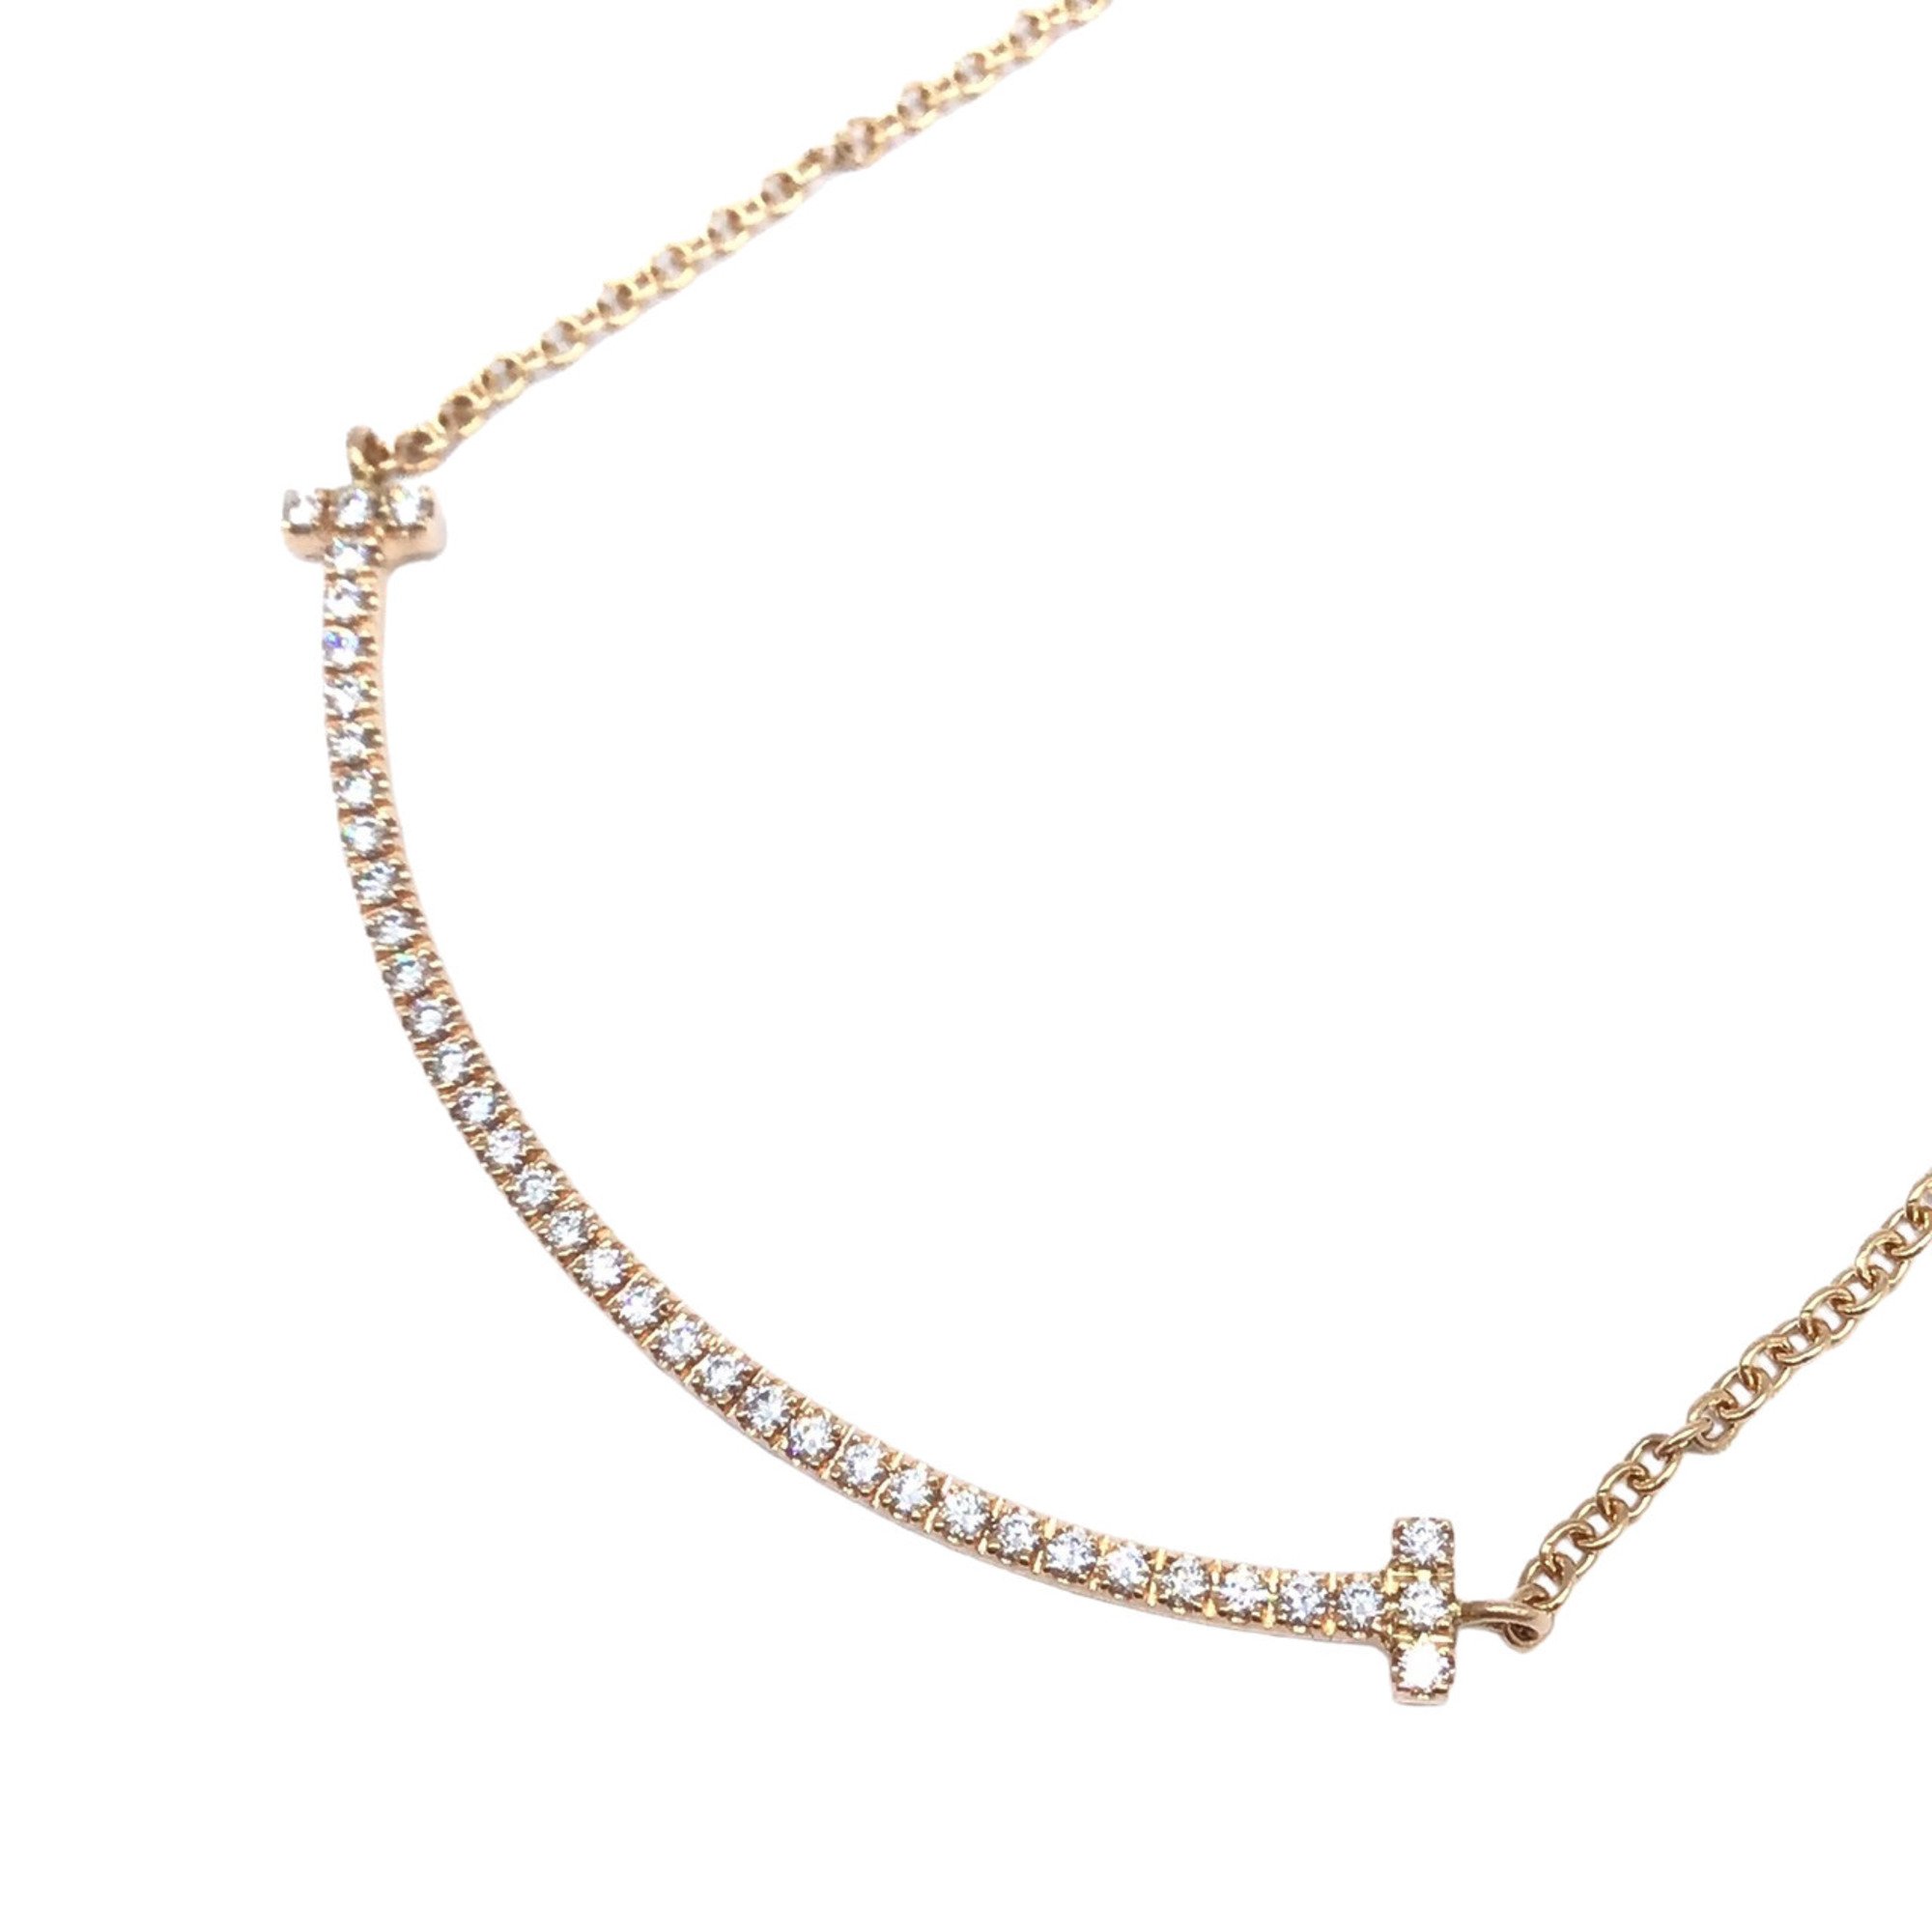 Tiffany & Co. T Smile Pendant Necklace K18RG Diamond Small Rose Gold Product Women's